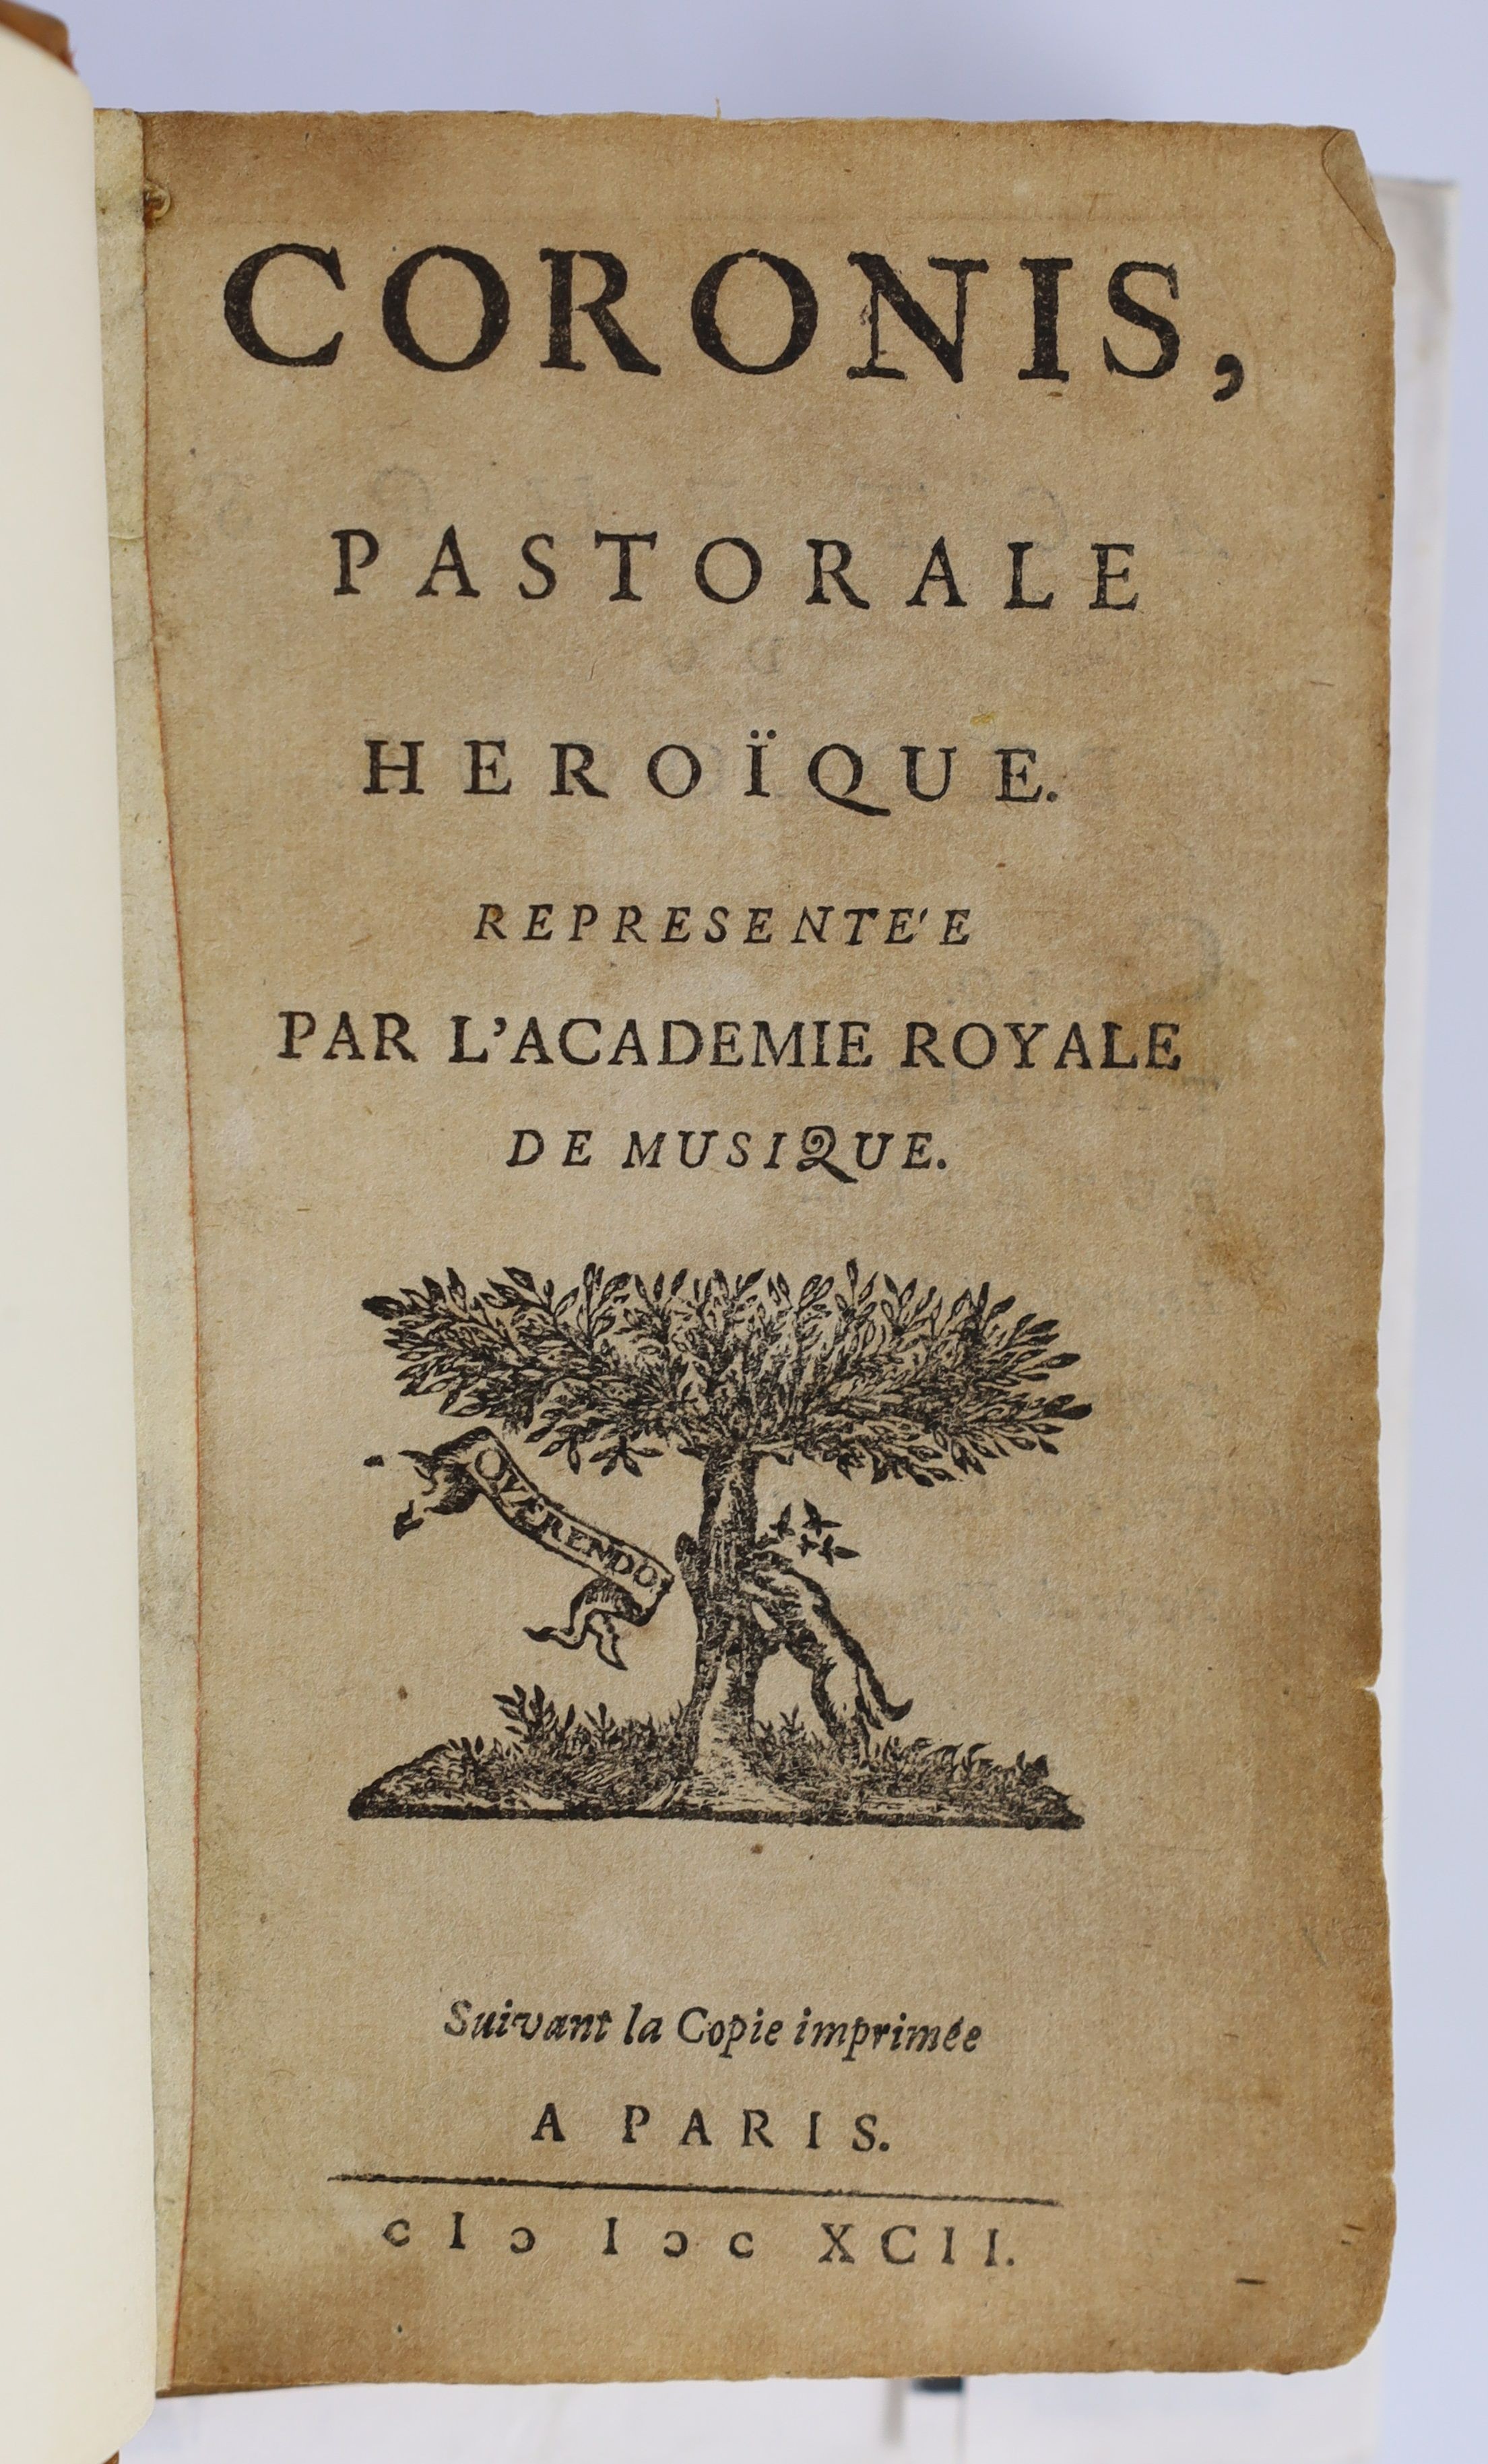 Dufresny, Charles Rivière - La Nopce Interrompue, Comedie, 12mo, quarter red morocco with marbled boards by Isadore Smeers, Pierre Ribou, Paris, 1699